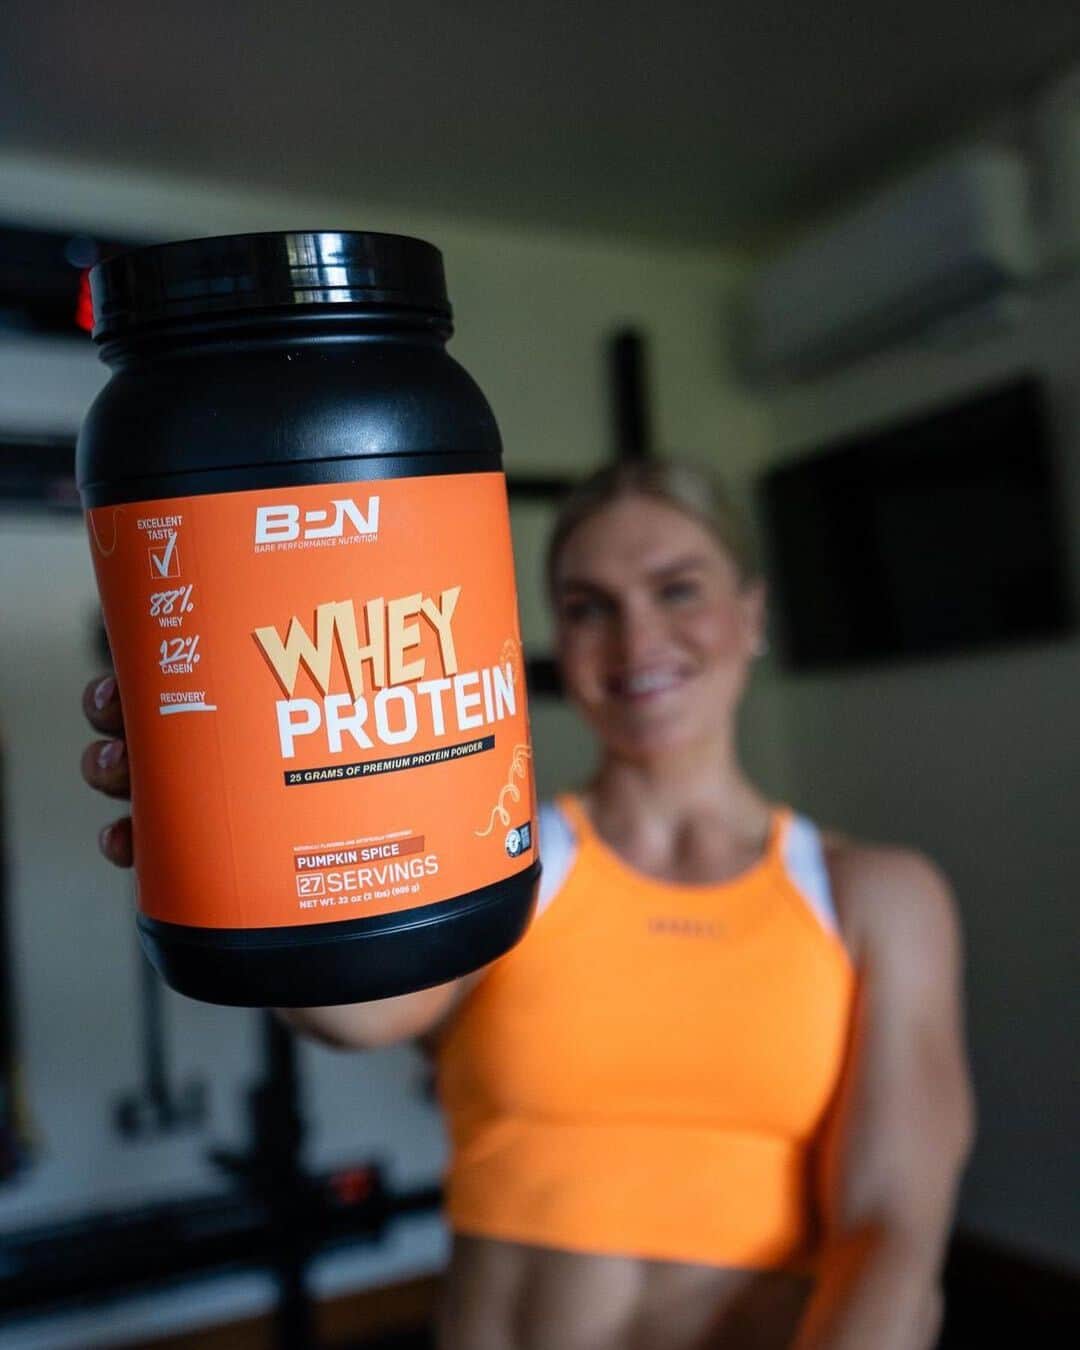 Katrin Tanja Davidsdottirのインスタグラム：「Everyone is FALLing for the flavor of the season - Pumpkin Spice 🍂😋  Our Pumpkin Spice Whey Protein is all you need to get your Fall fix! Plus it has 25 grams of protein per serving. Just try it for yourself!」